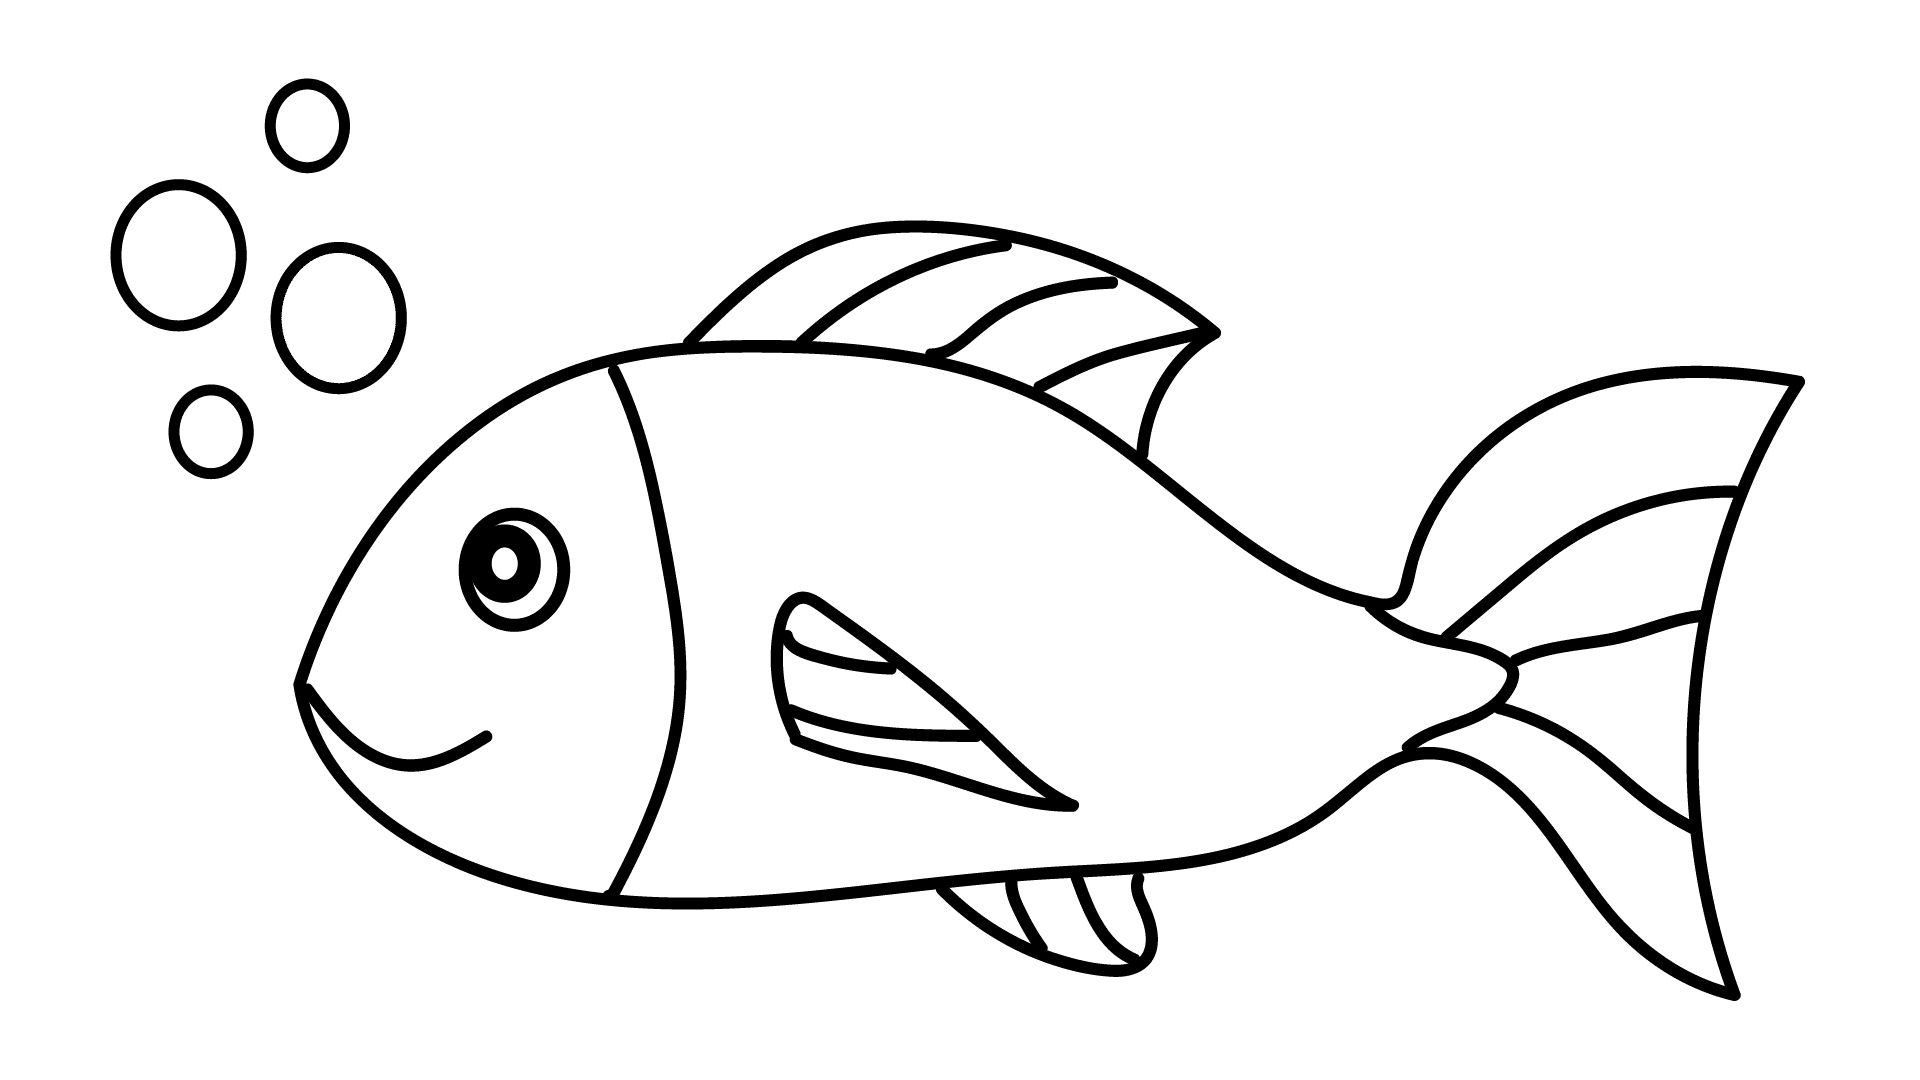 How to draw a fish - Step 6